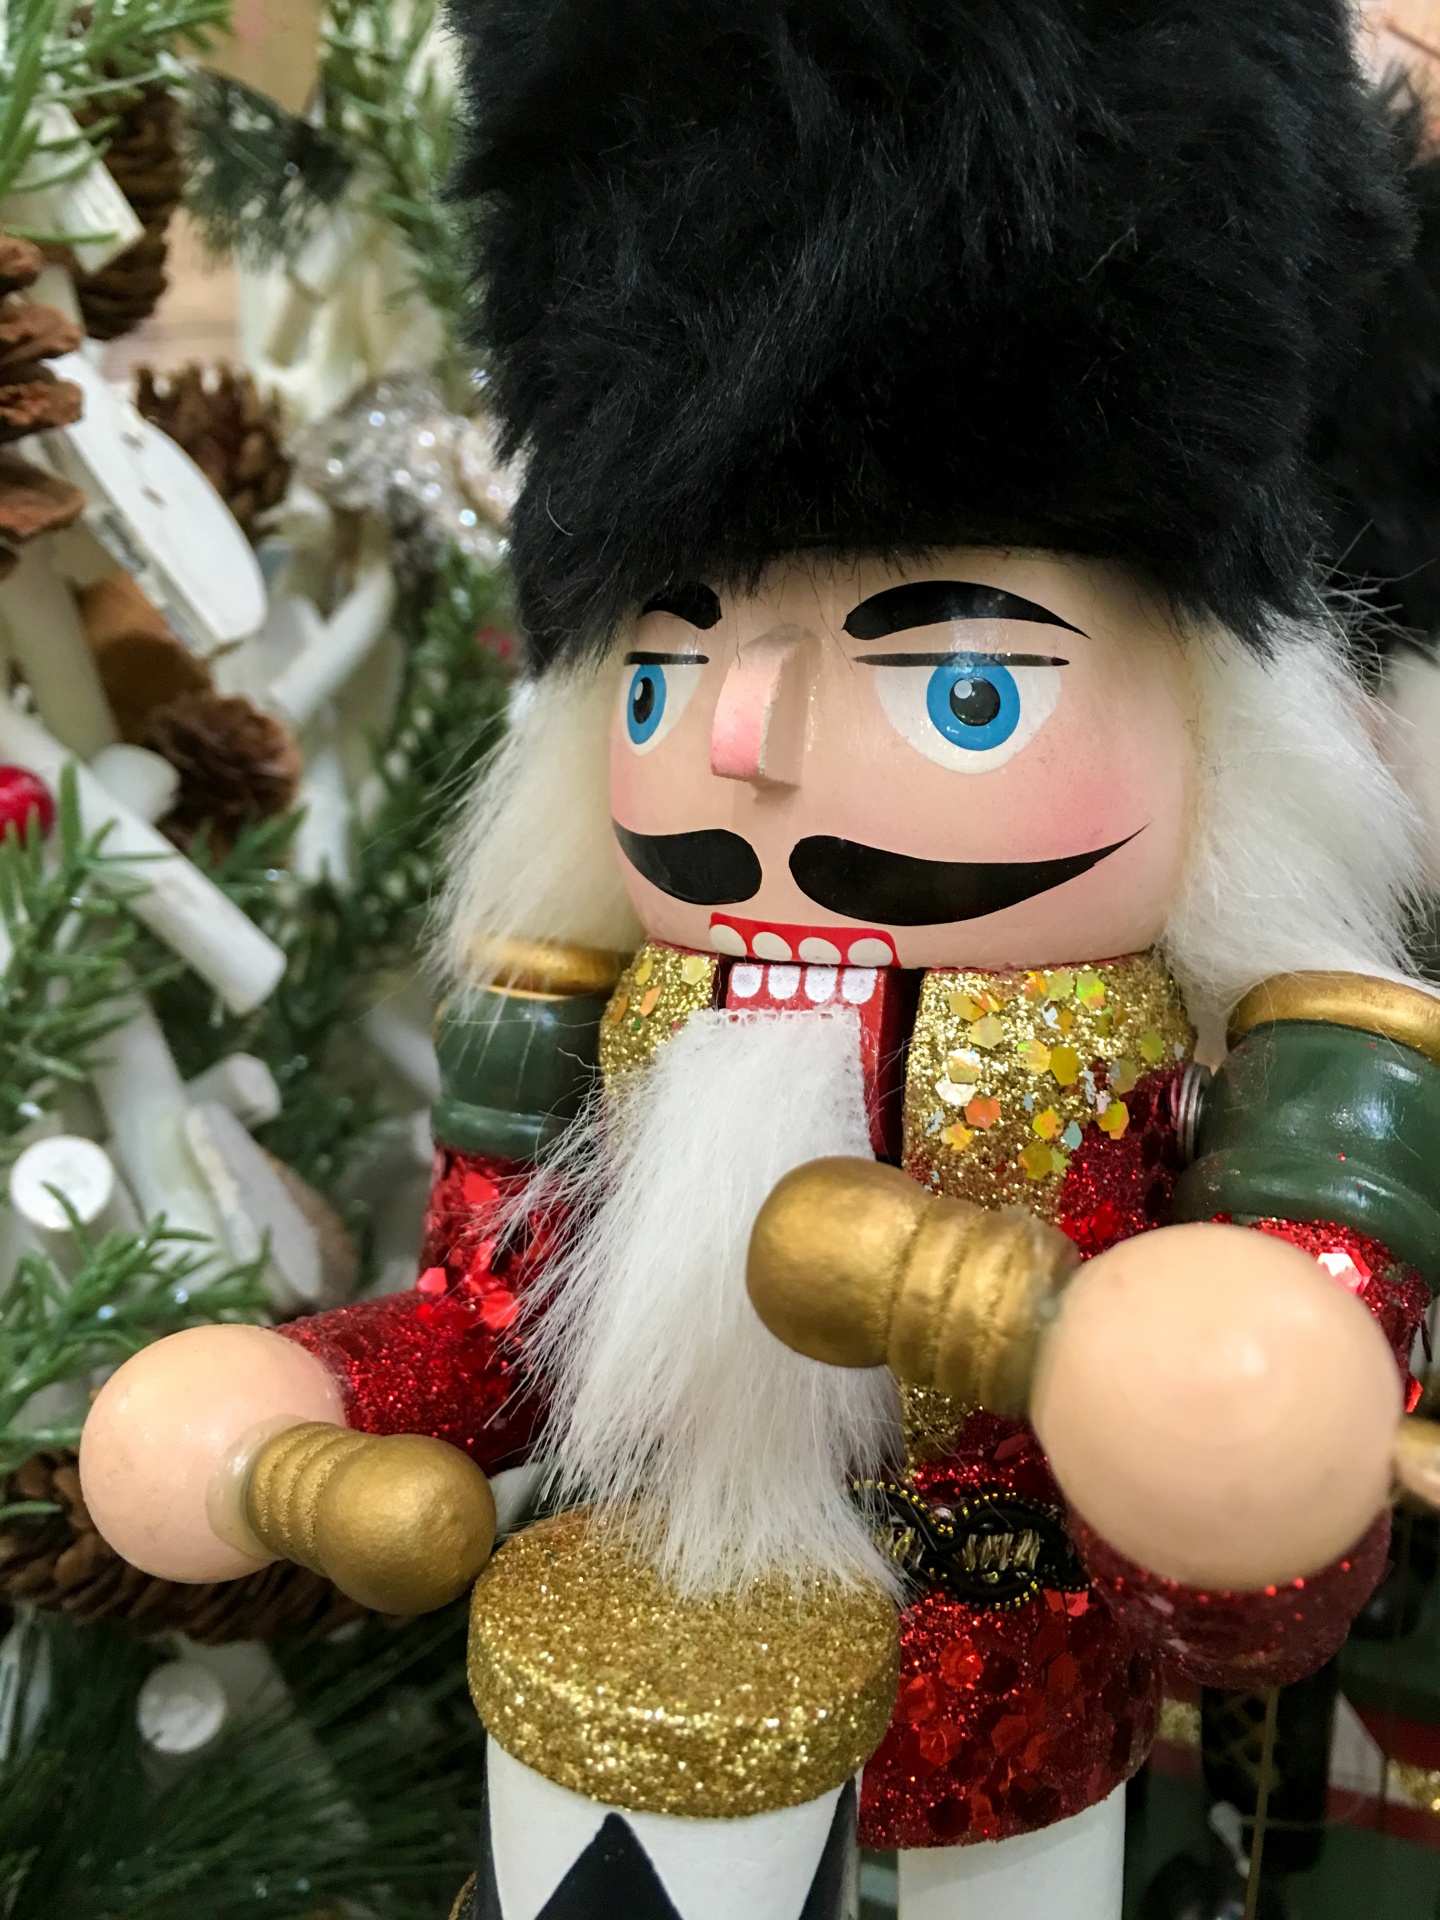 Traditional Christmas nutcracker soldier